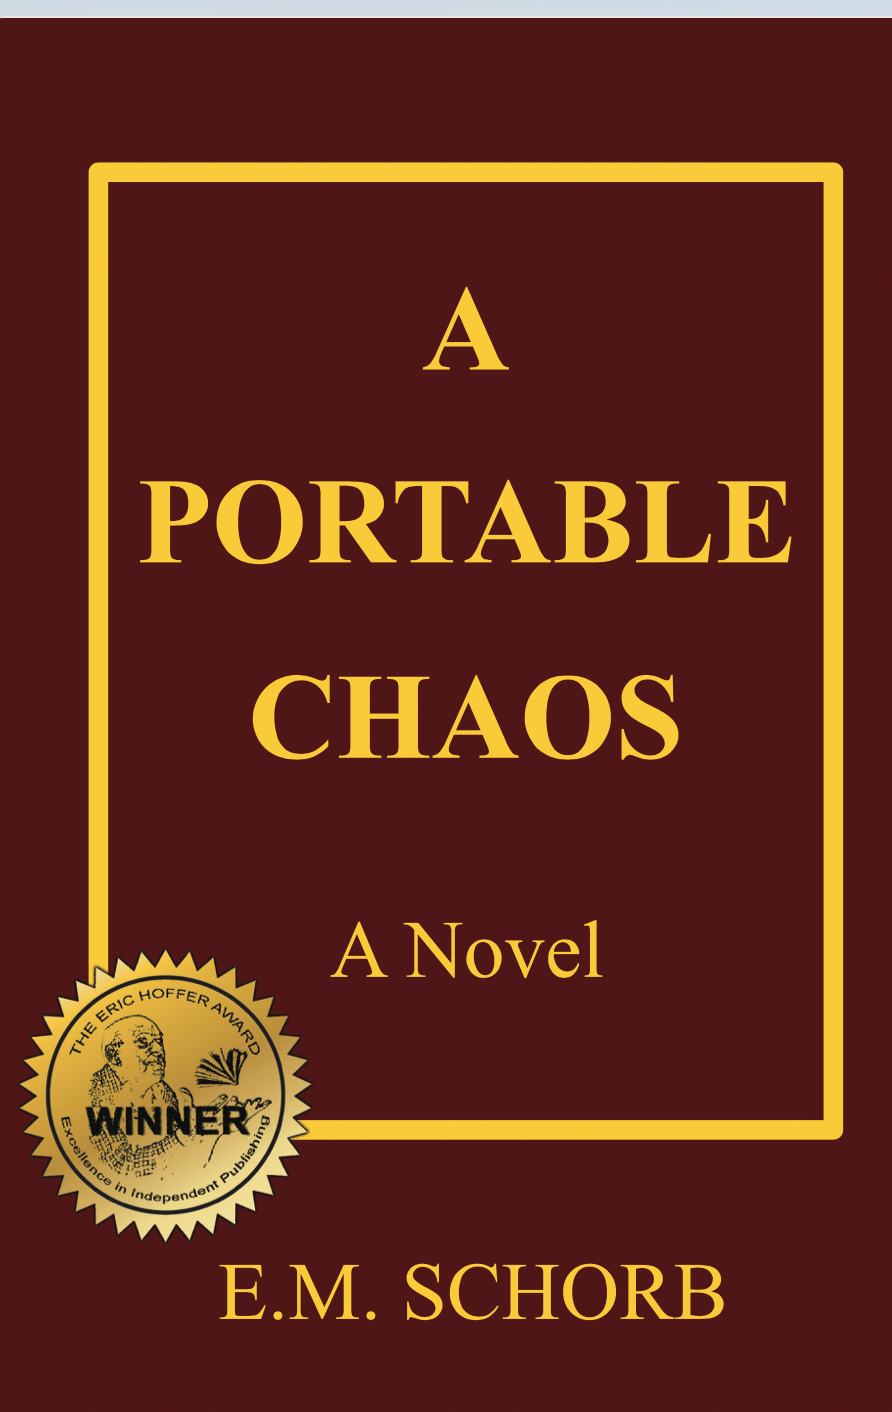 book cover with award